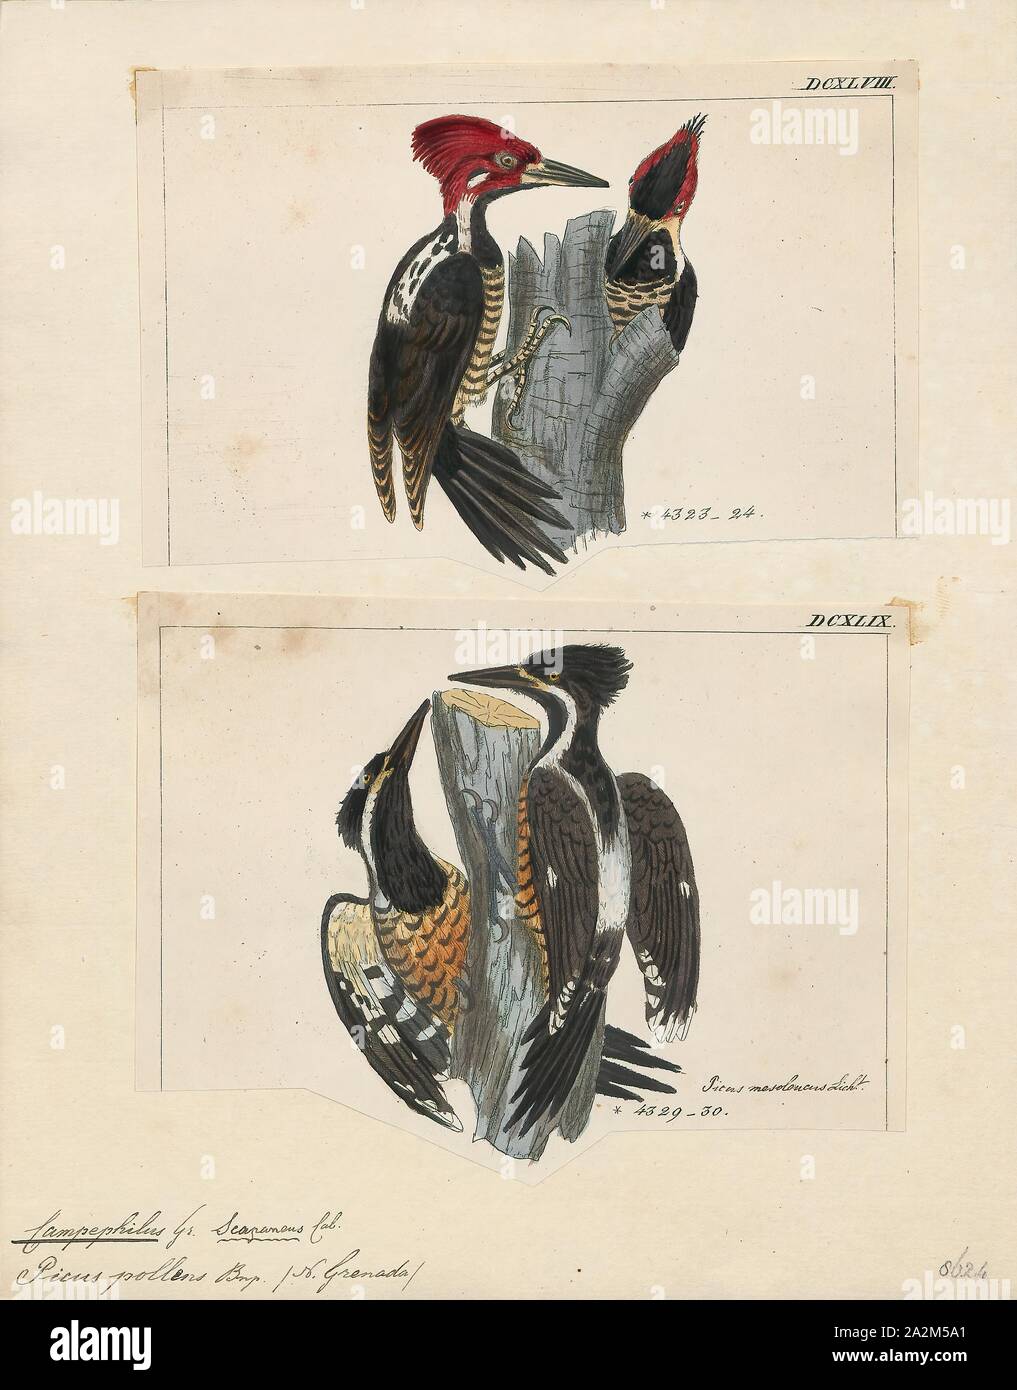 Campephilus pollens, Print, The powerful woodpecker (Campephilus pollens) is a species of bird in the family Picidae. It is found in Colombia, Ecuador, Peru, and Venezuela. This little-known species is a large woodpecker, 33–38 cm (13–15 in) long, and is a close relative to the North American ivory-billed woodpecker., 1700-1880 Stock Photo